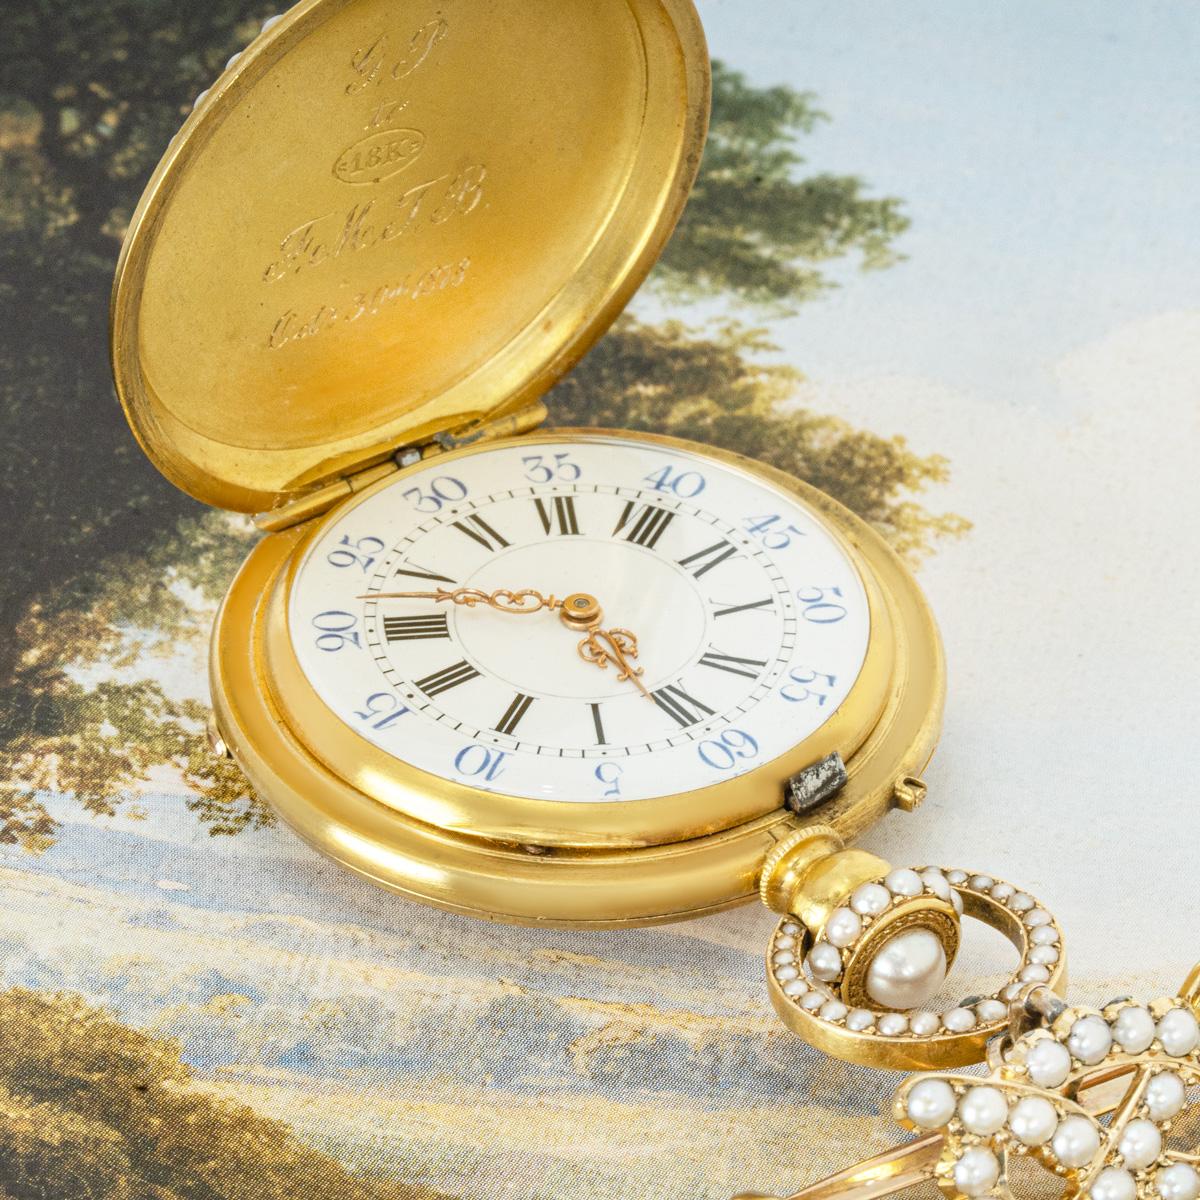 Lund & Blockley. A Gold Enamel and Pearl Full Hunter Keyless Cylinder Fob Watch With Matching Pearl and Diamond Brooch. C1880

Dial: A beautiful white enamel dial with black Roman Numerals and outer minute track with very unusual blue Arabic numbers